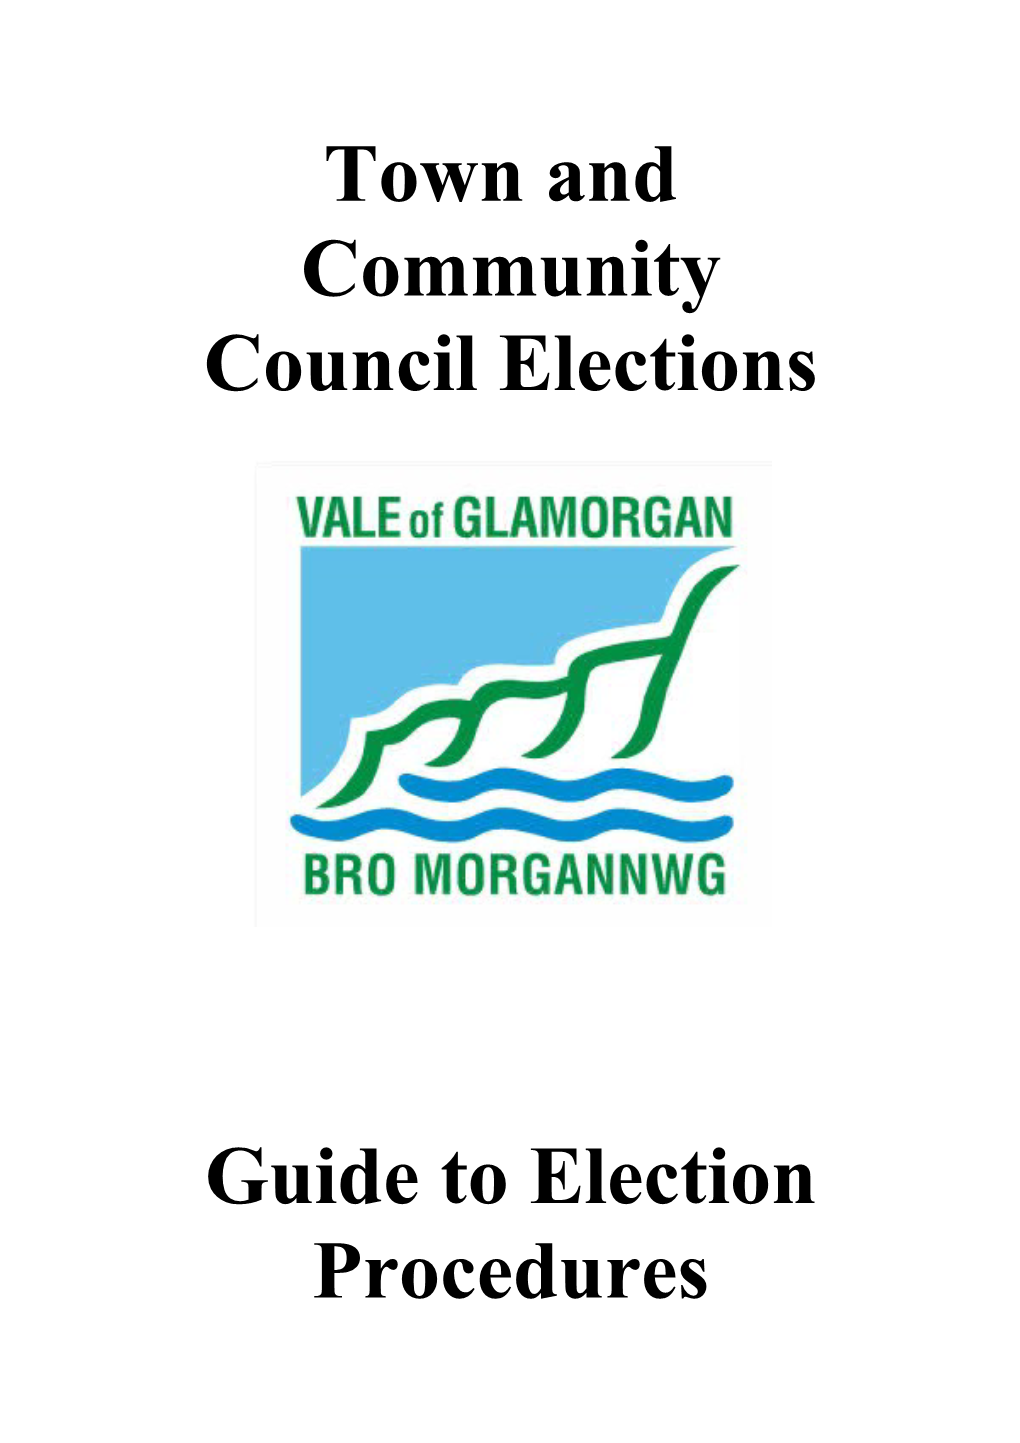 Community-Councils Guide-To-Elections